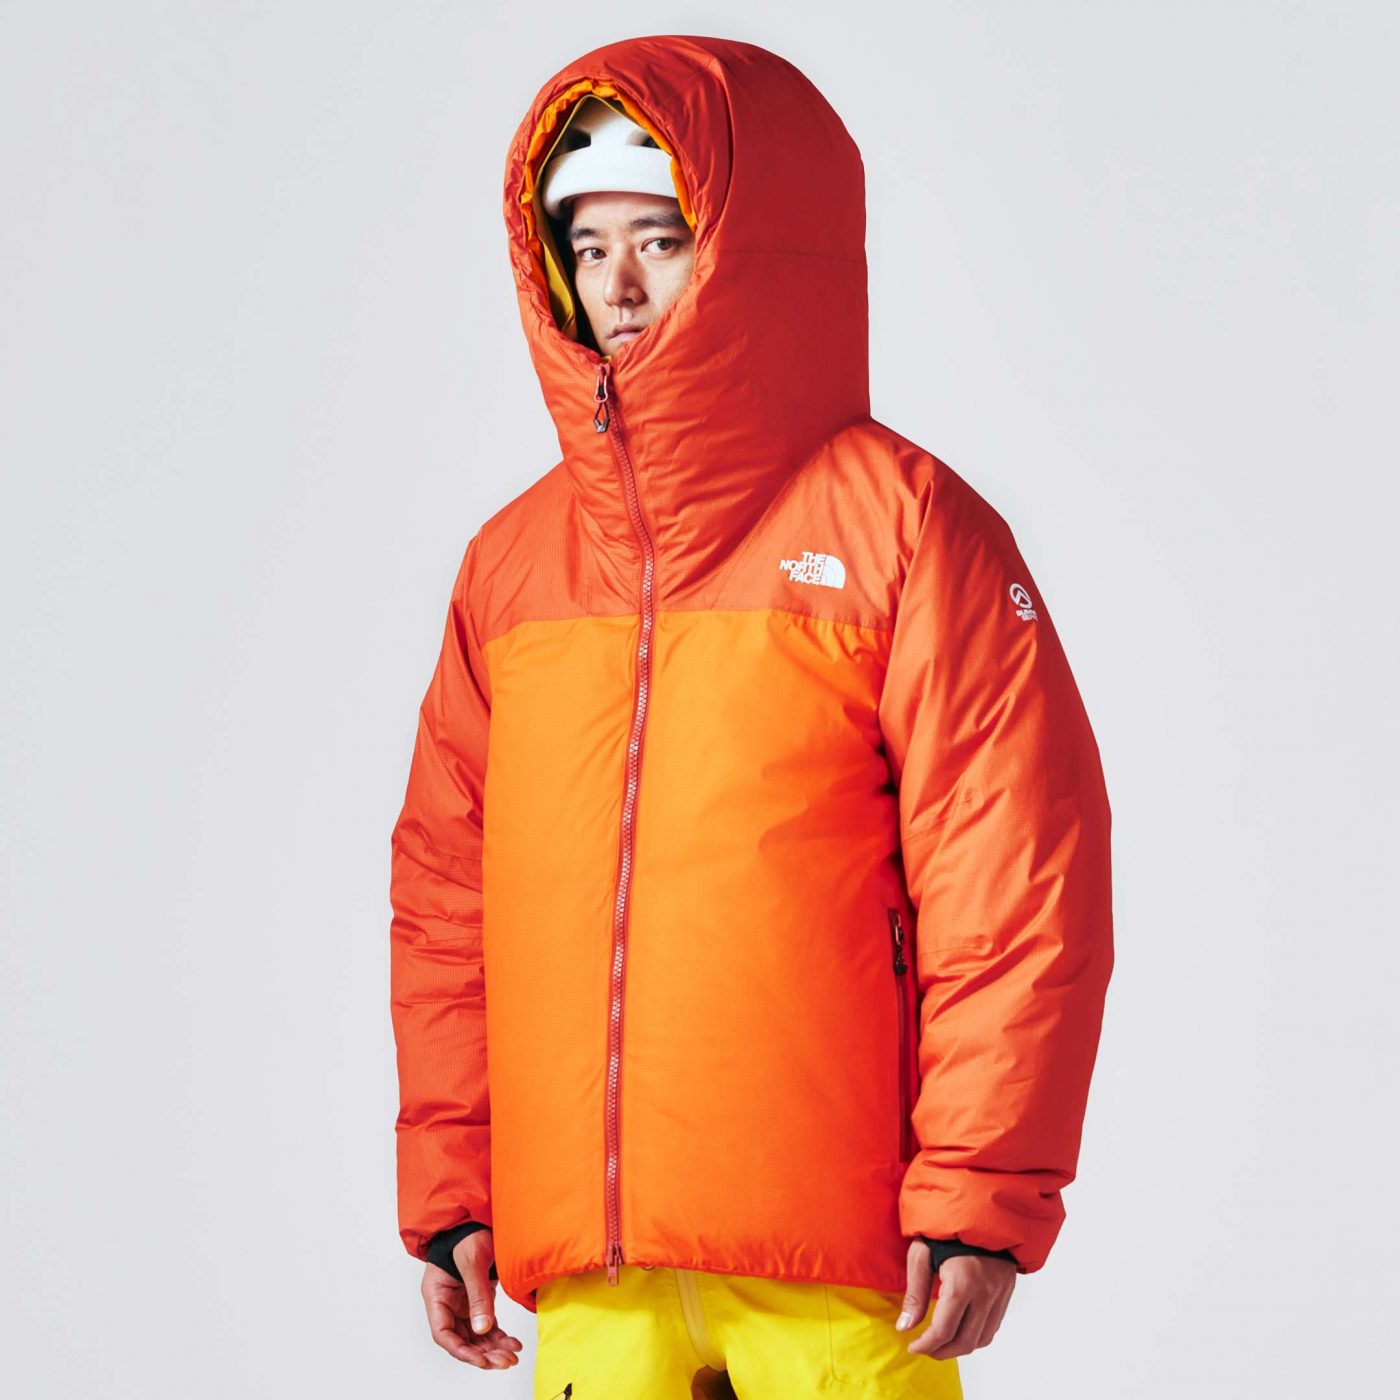 AGLOW DOUBLEWALL JACKET (NP62120 / UNISEX) - THE NORTH FACE MOUNTAIN